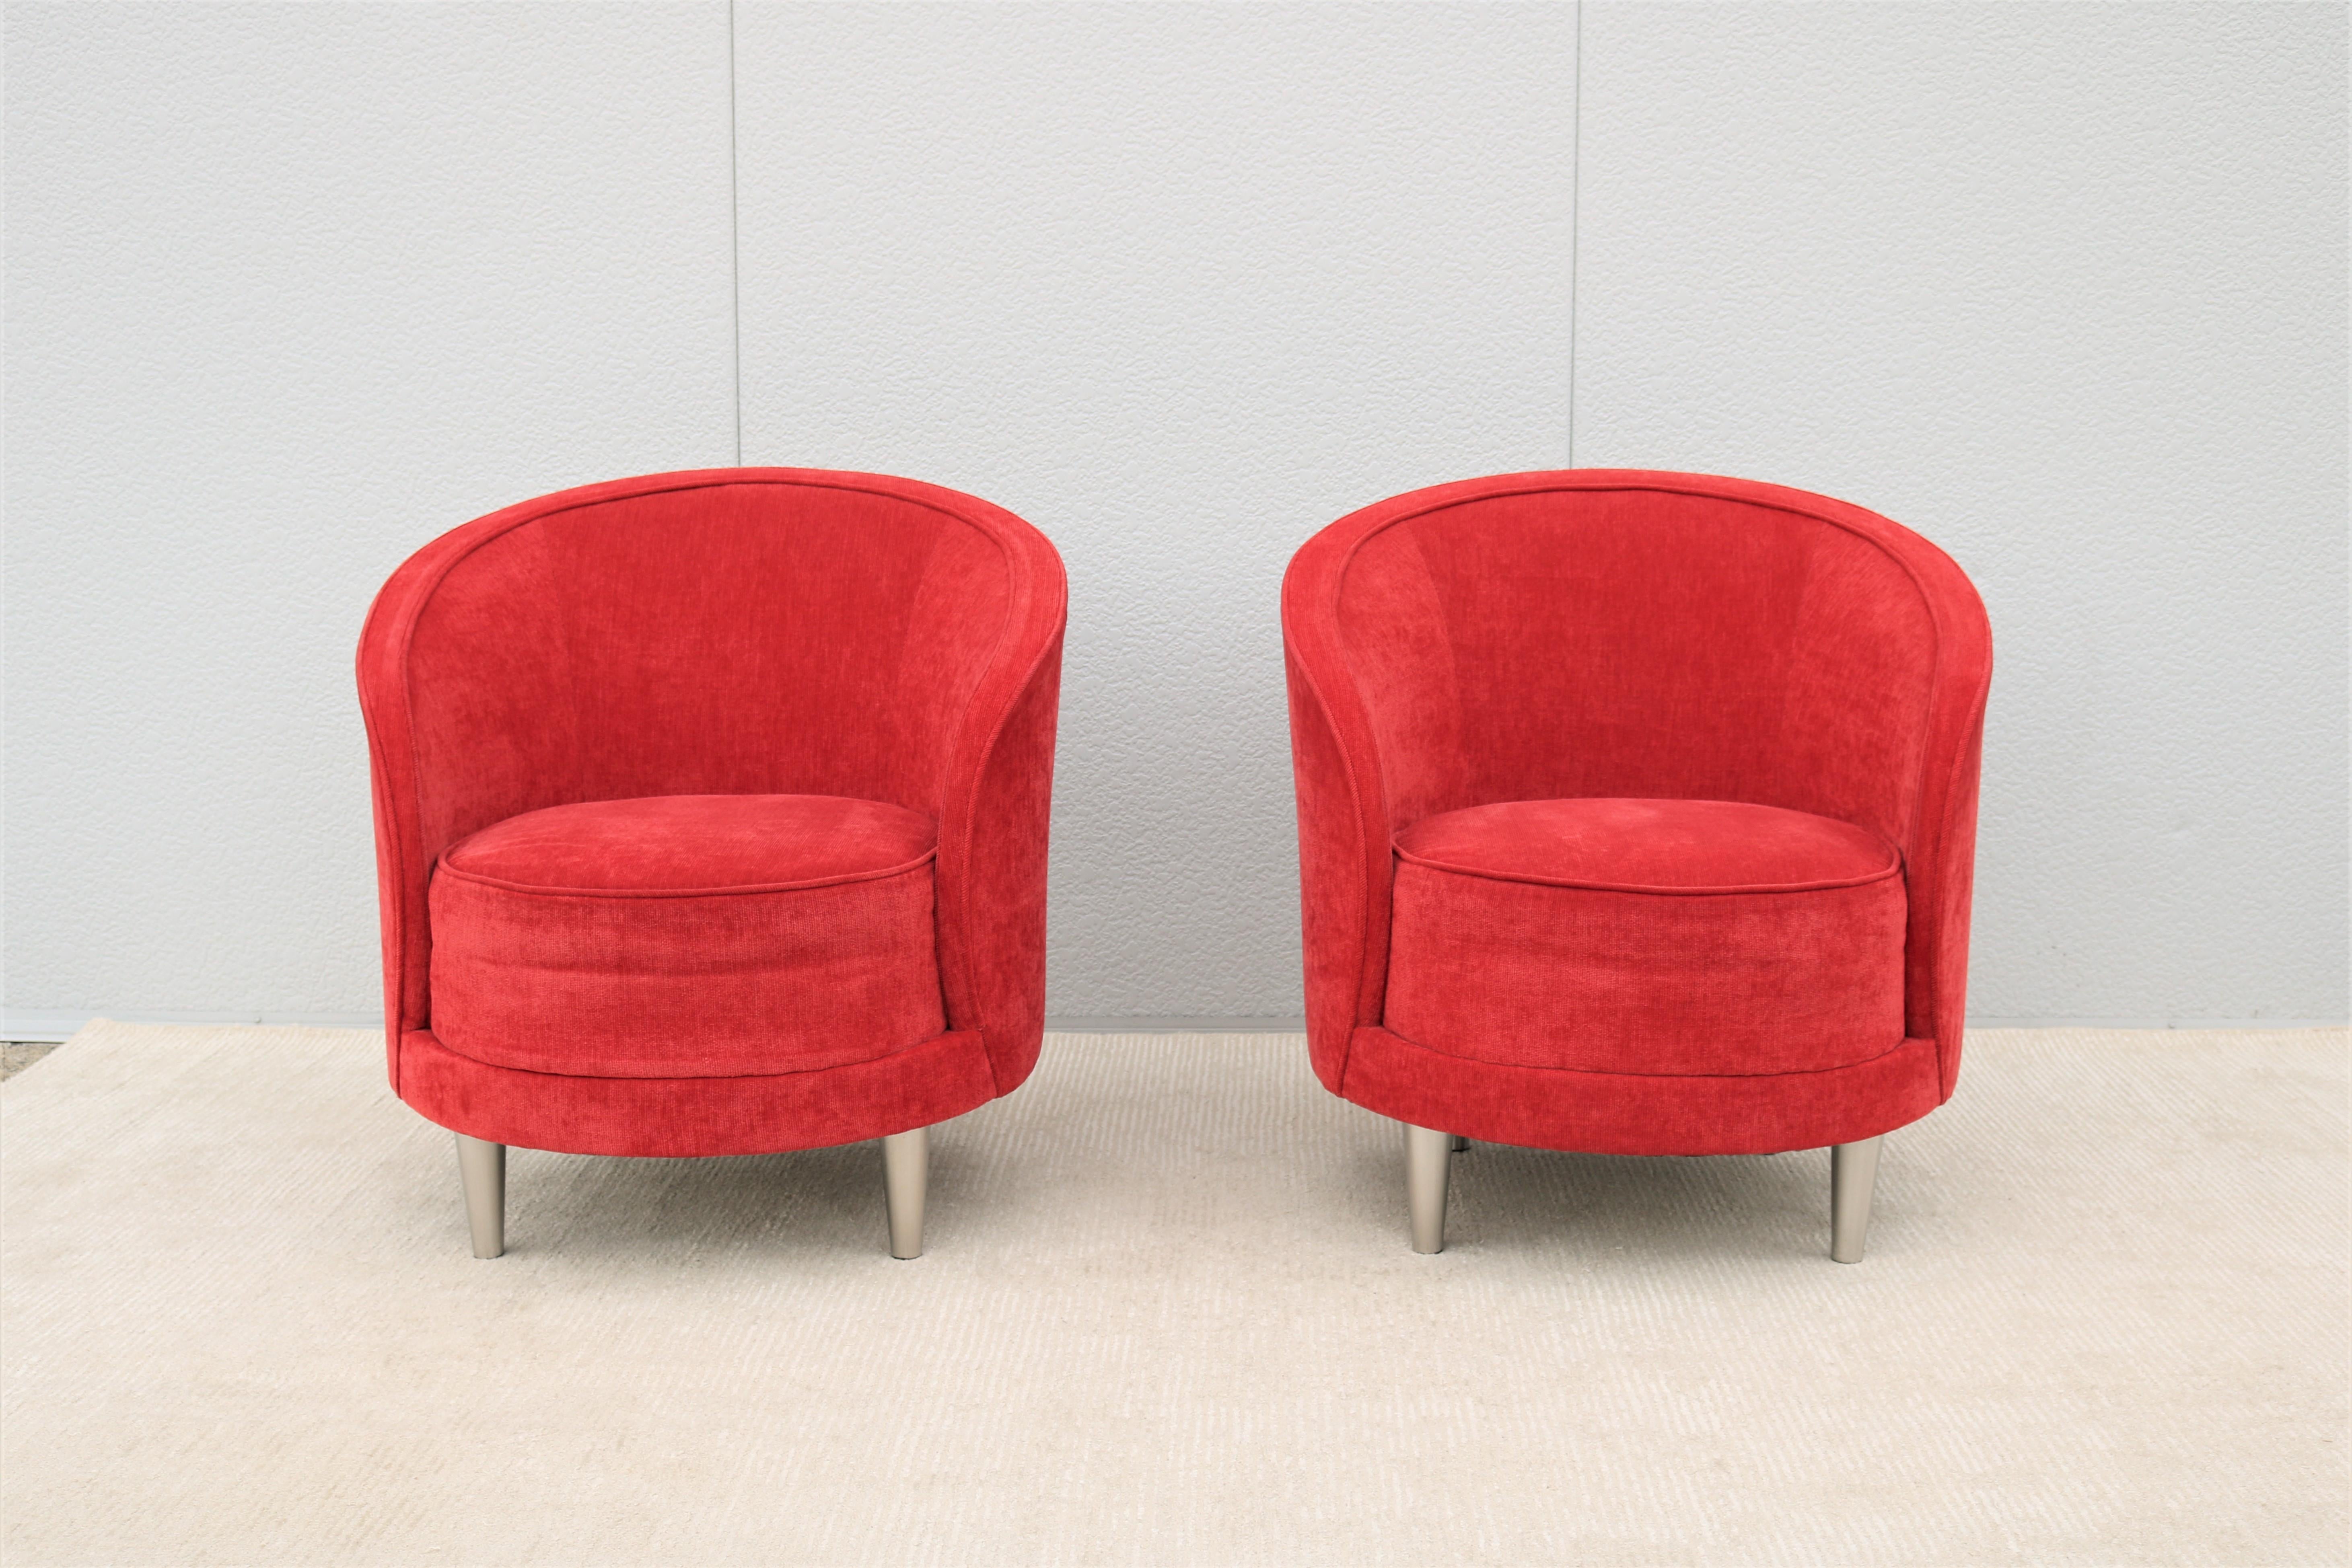 Contemporary Modern Martin Brattrud Kinsale Red Barrel Lounge Chairs, a Pair For Sale 6